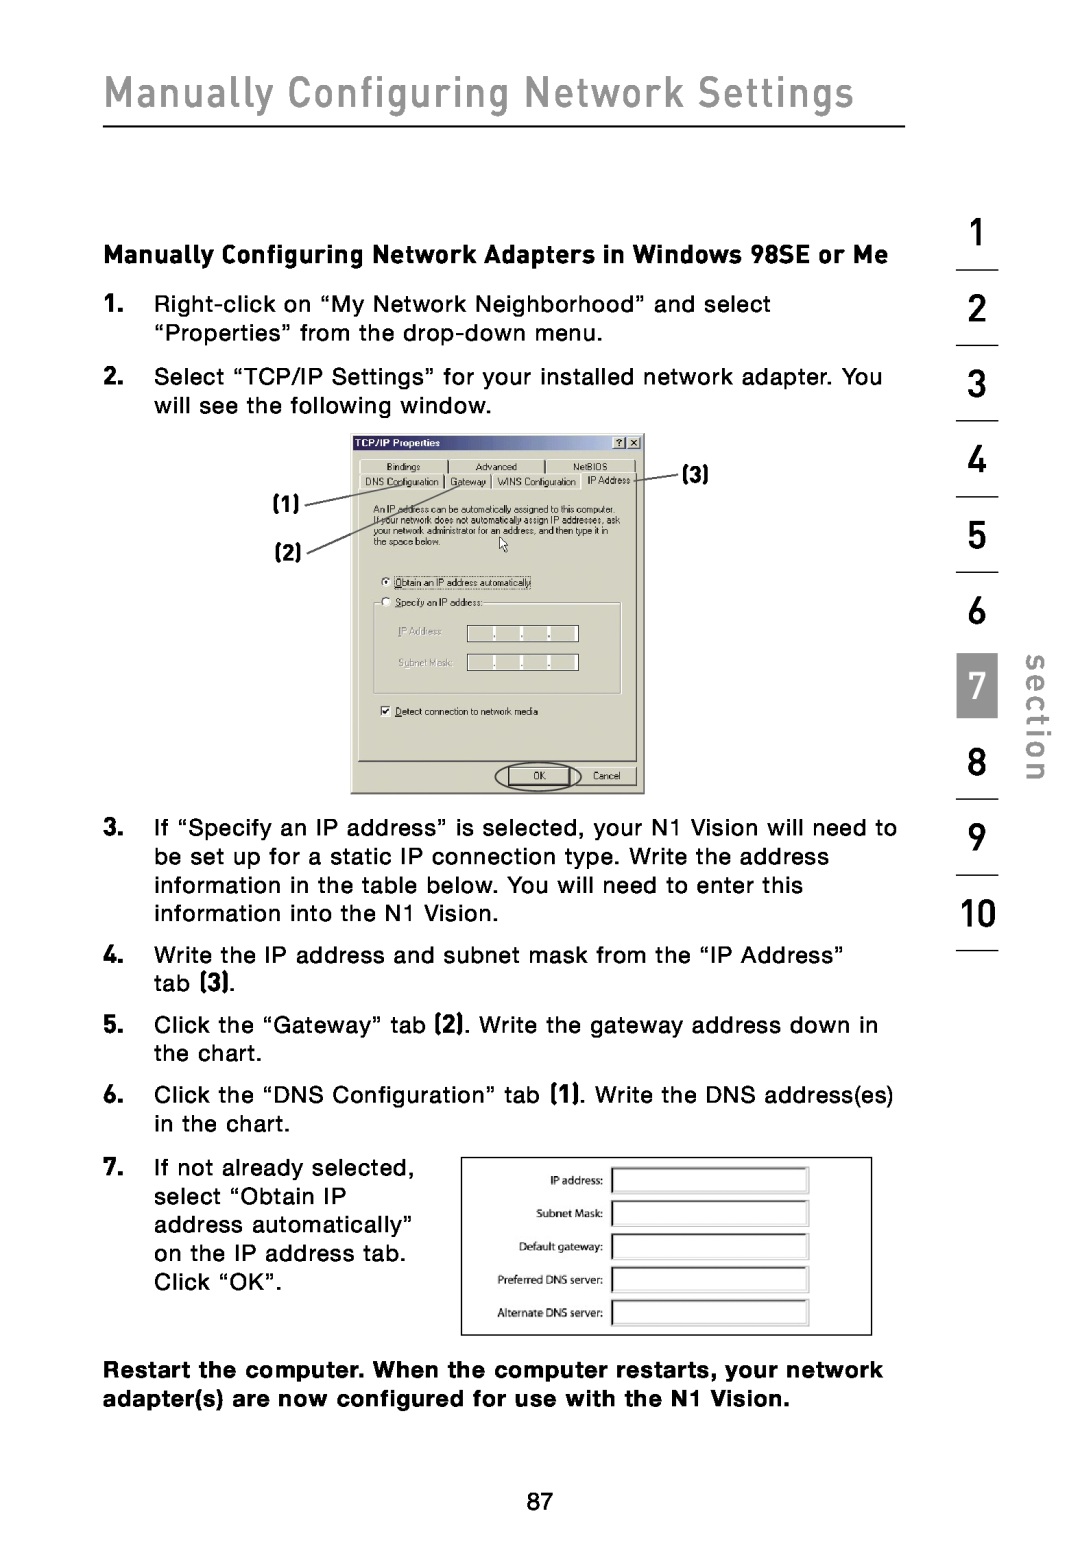 Belkin N1 Manually Configuring Network Adapters in Windows 98SE or Me, Manually Configuring Network Settings, section 